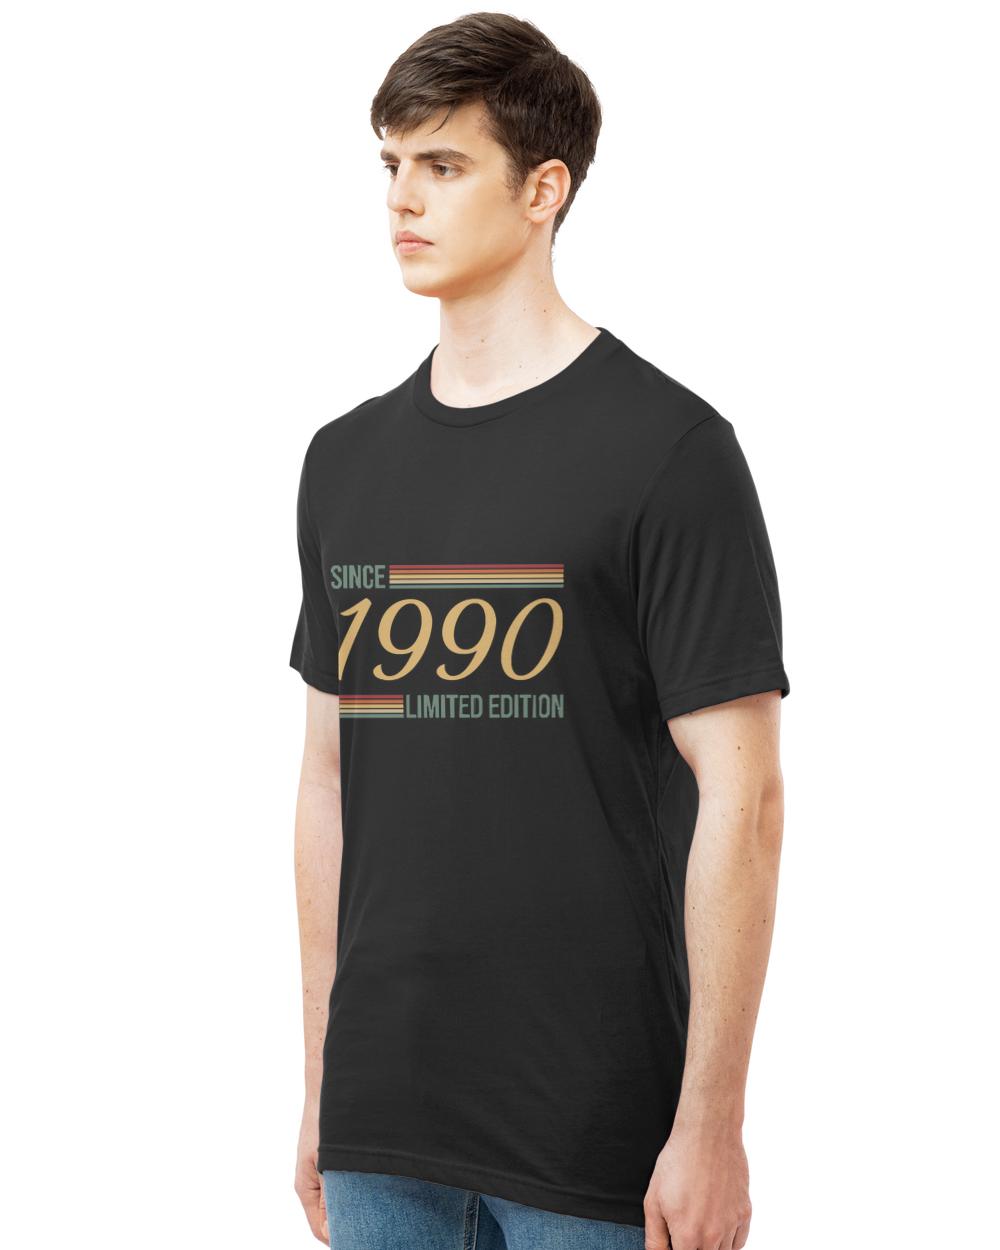 Since 1990 Limited Edition T-ShirtVintage Since 1990 Limited Edition T-Shirt